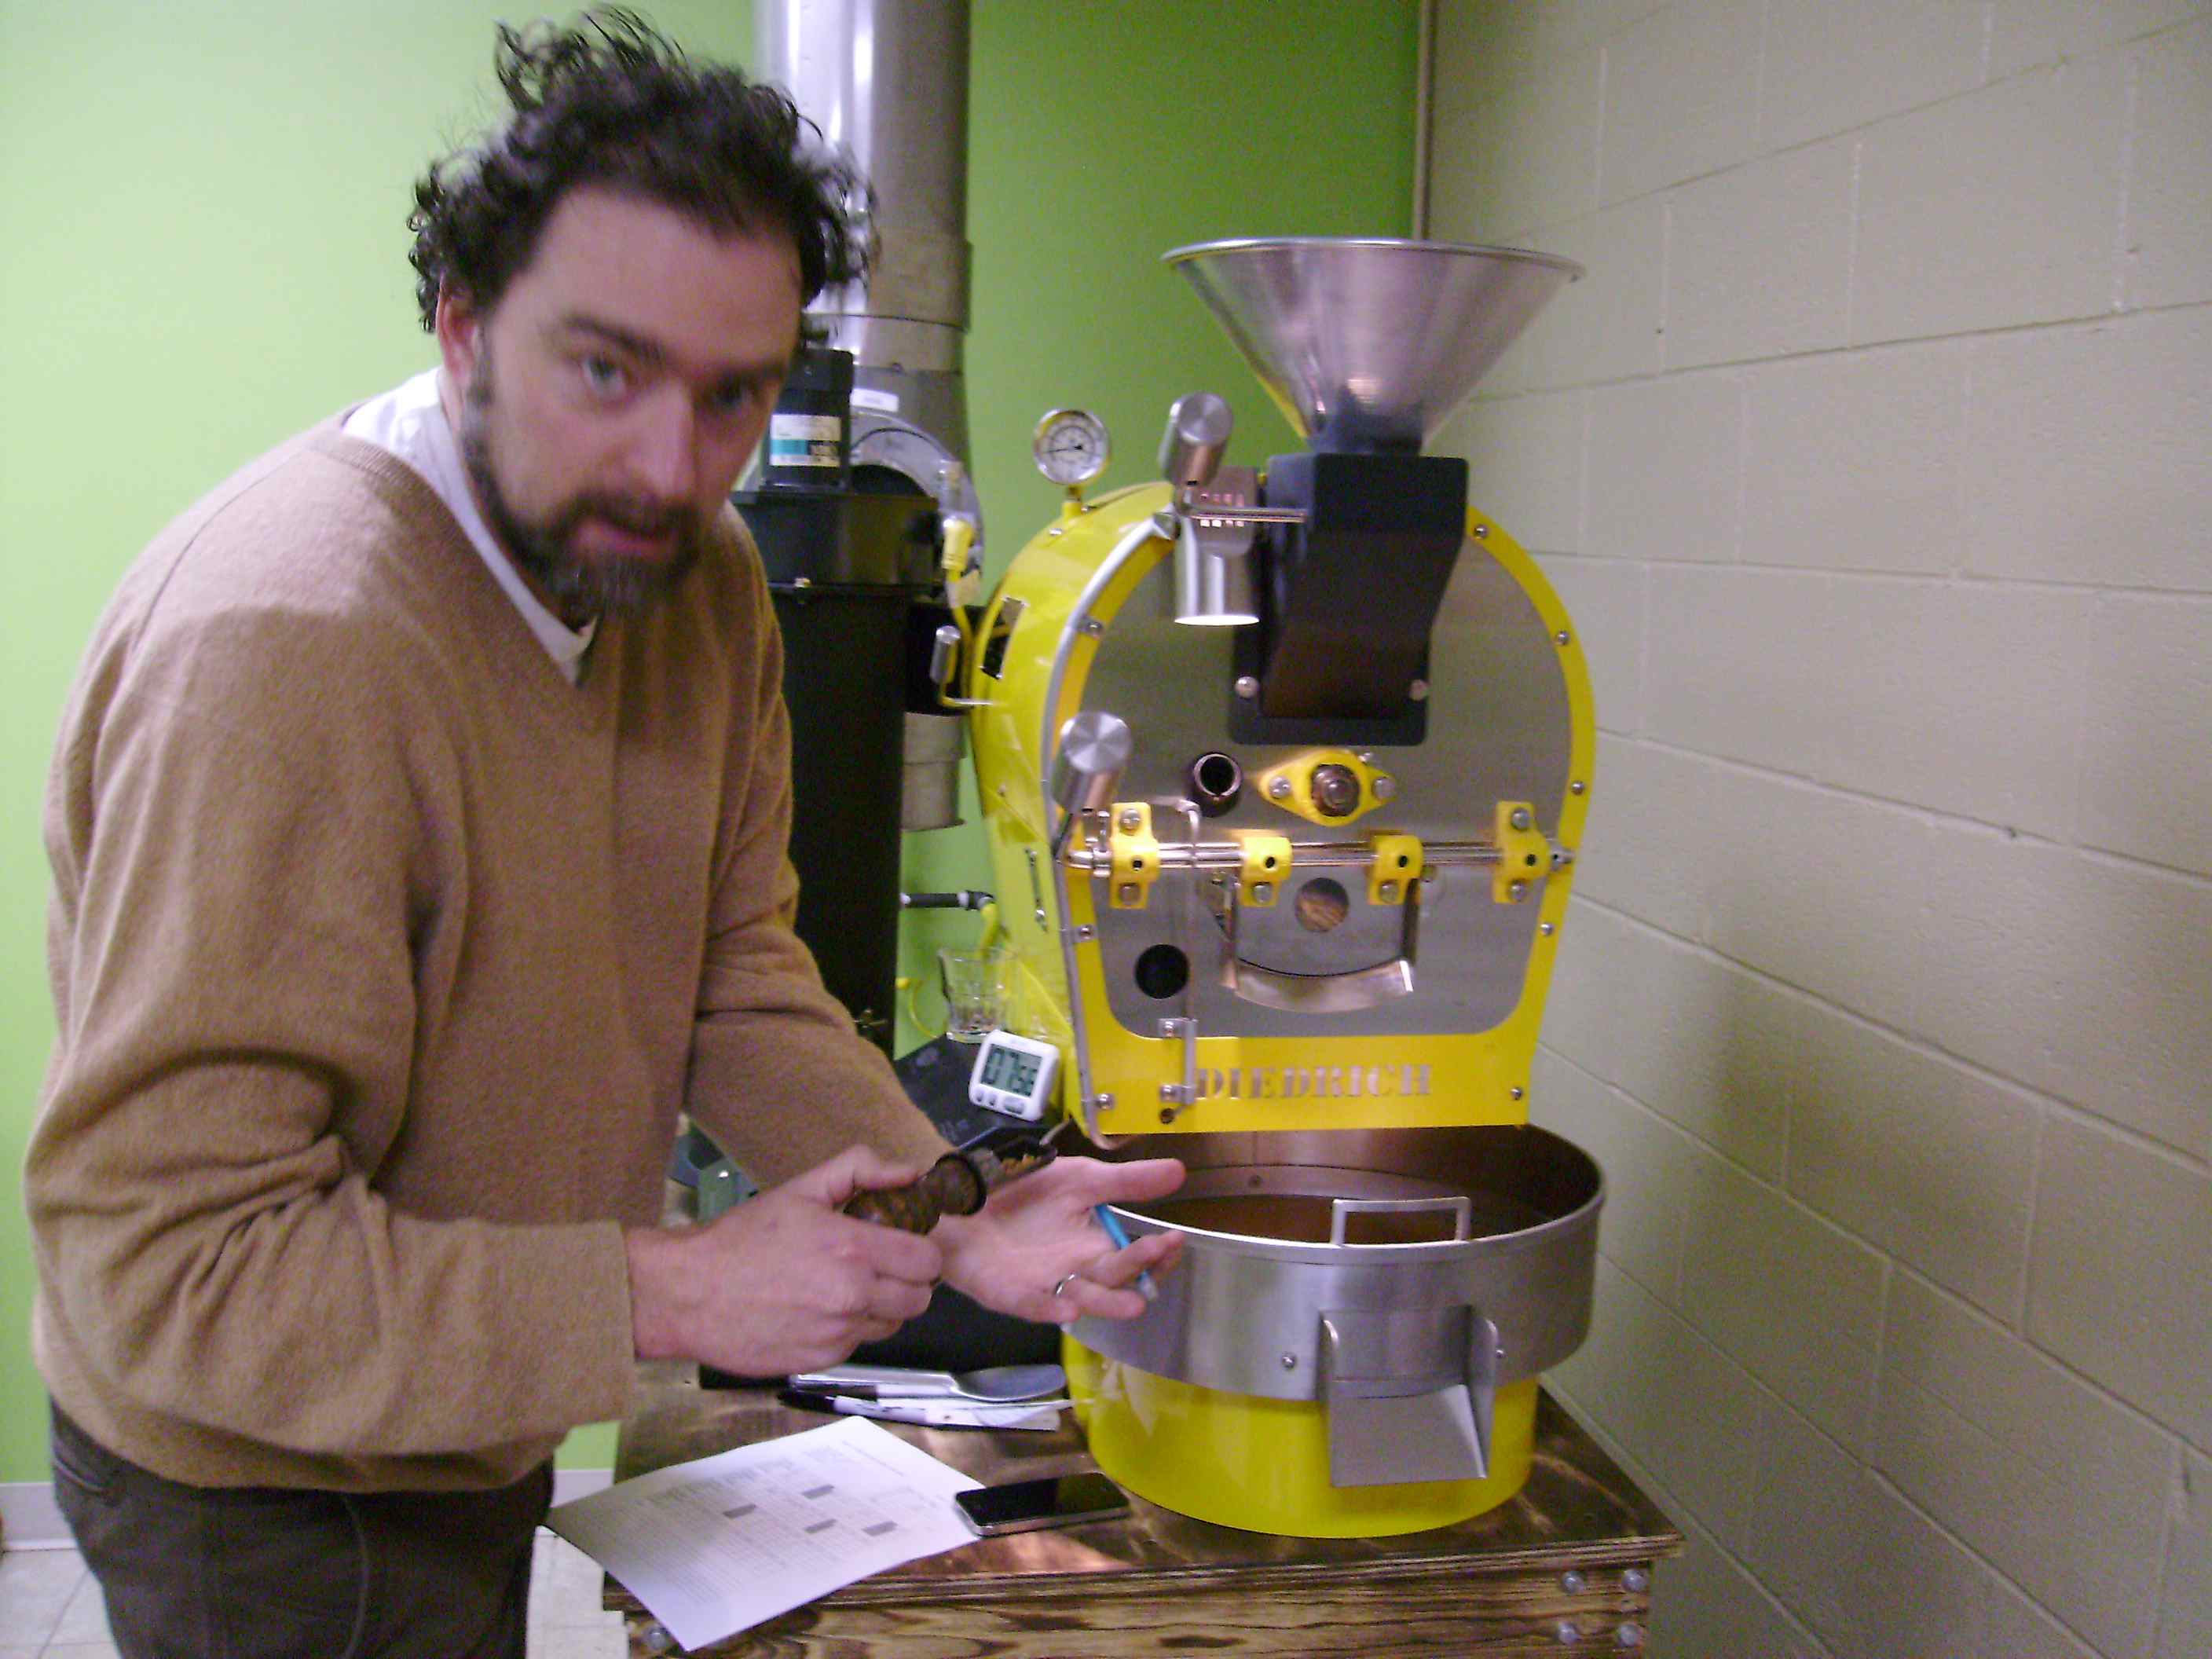 Throughout the roasting process, Jed has to constantly monitor the progress of the beans. 